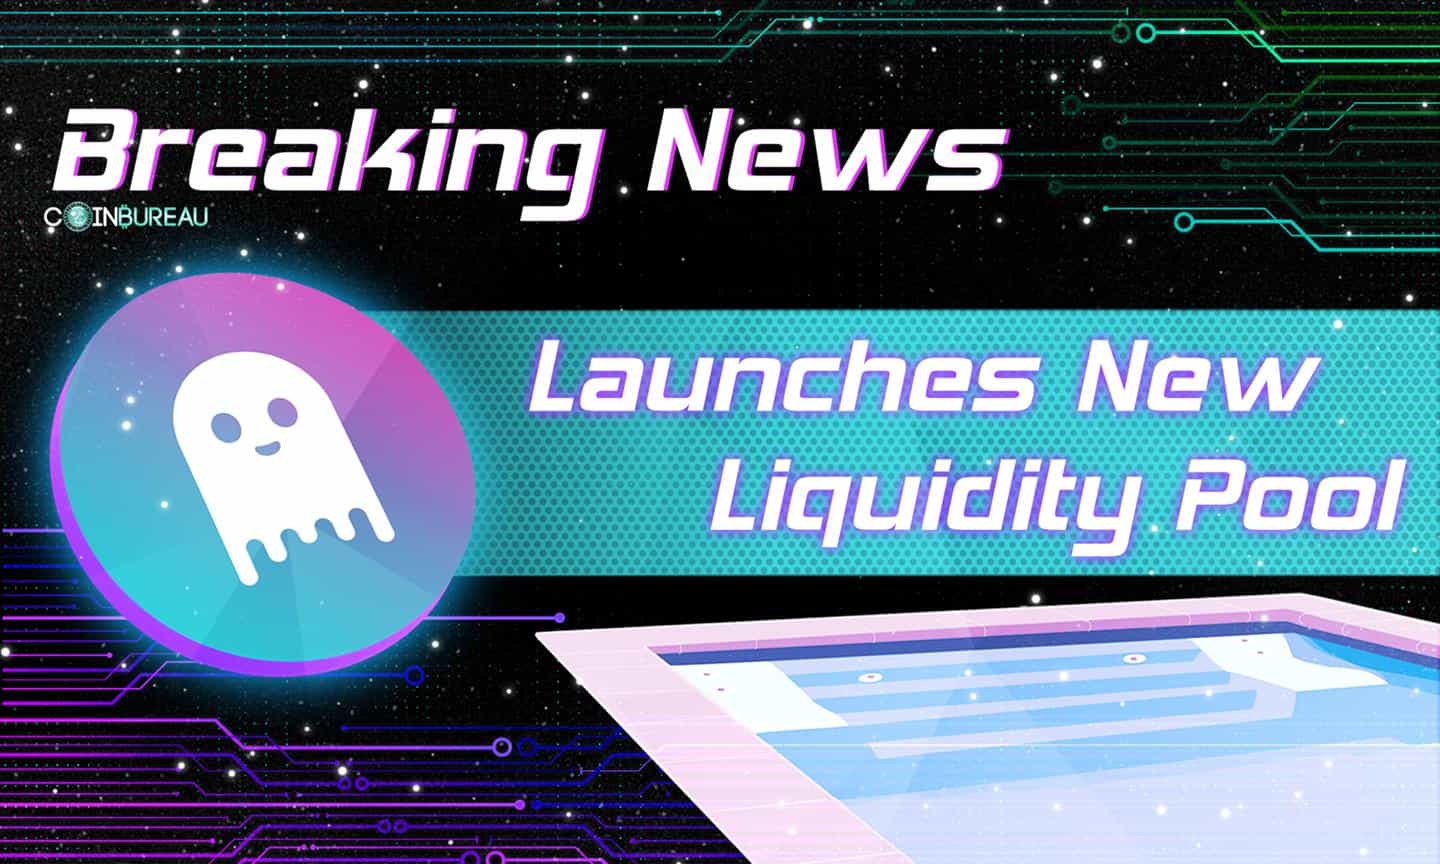 Aave Launches New Liquidity Pool With 30 Institutions Already On Board